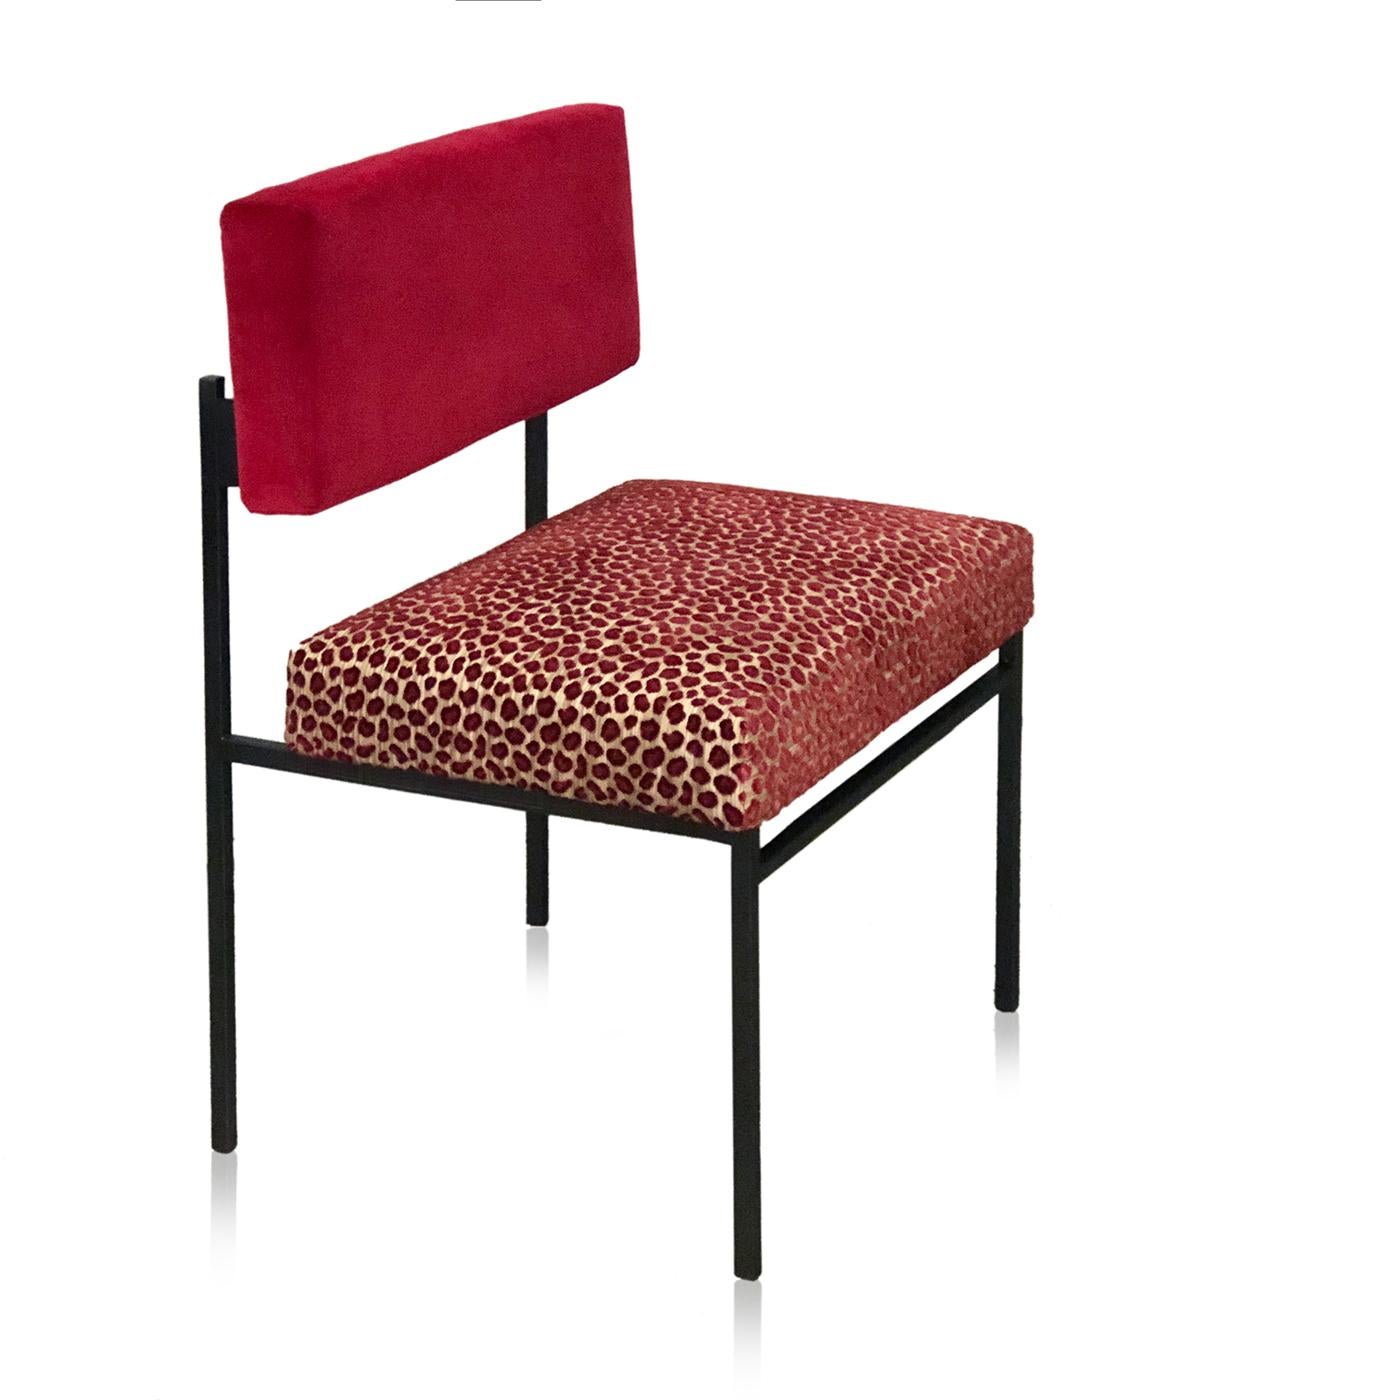 Offering a 50s retro appeal, this top selling item to restaurants and hotels is designed with clean, bold lines. The brushed iron frame is complemented by a padded seat and back with a chic cover in cotton velvet. Perfect for relaxing into a great